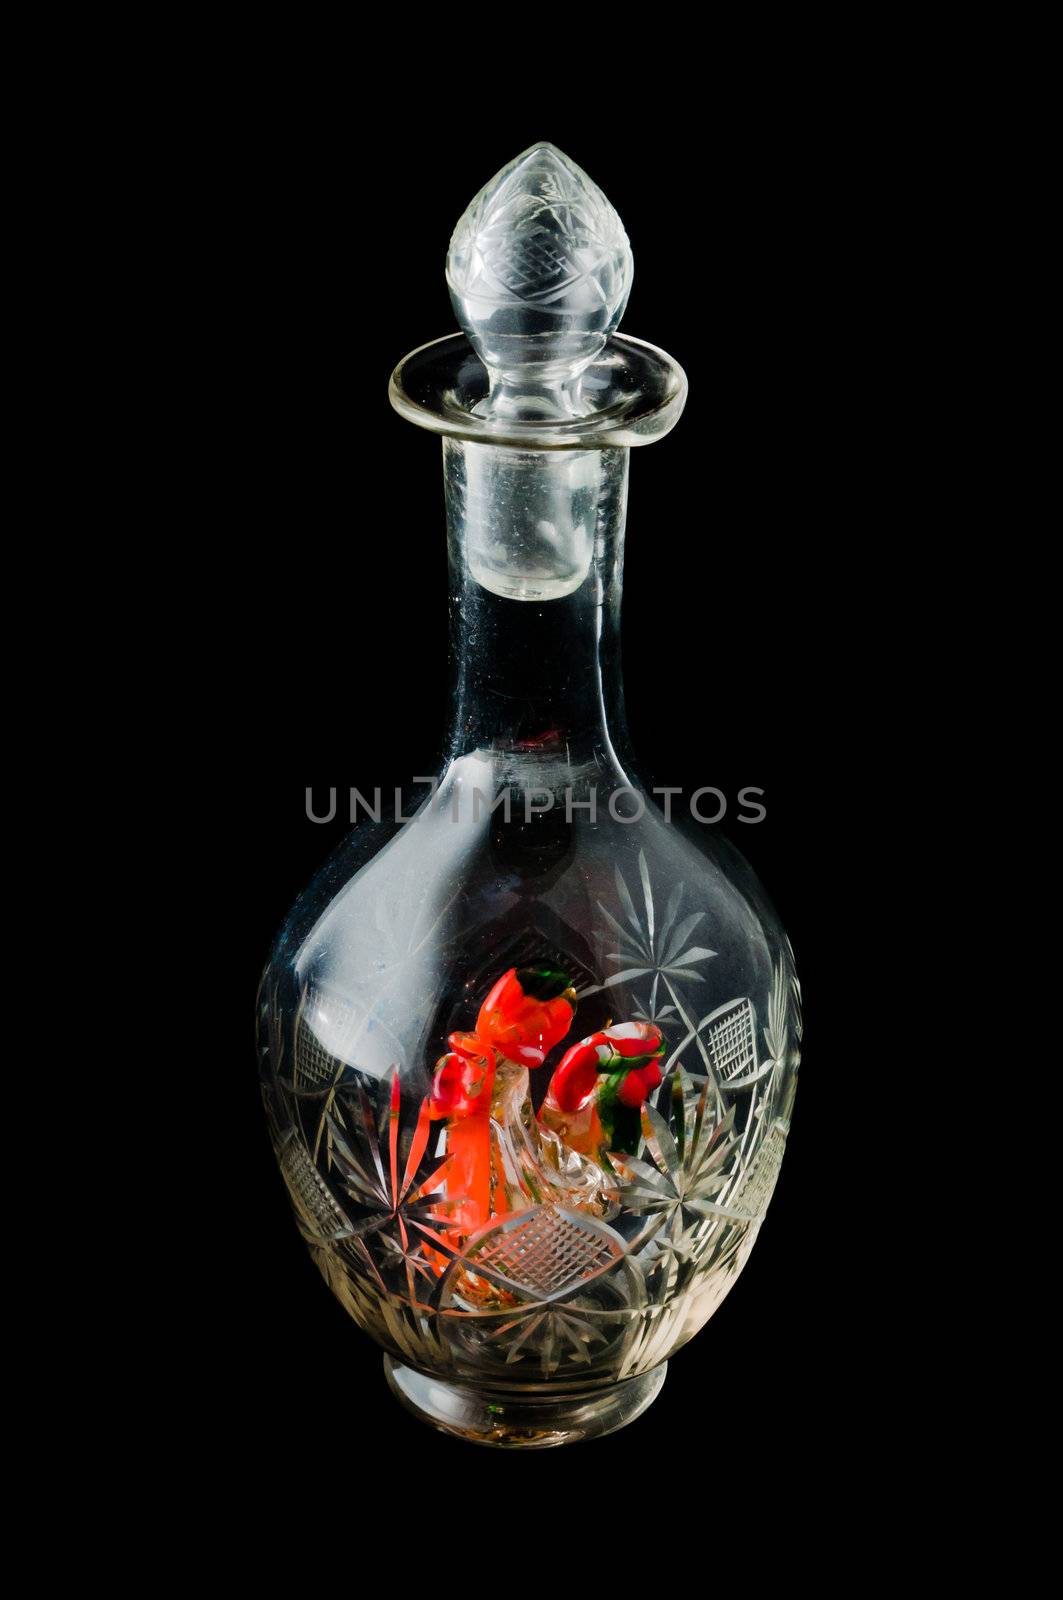 Empty decanter with pattern and colored bird figure inside